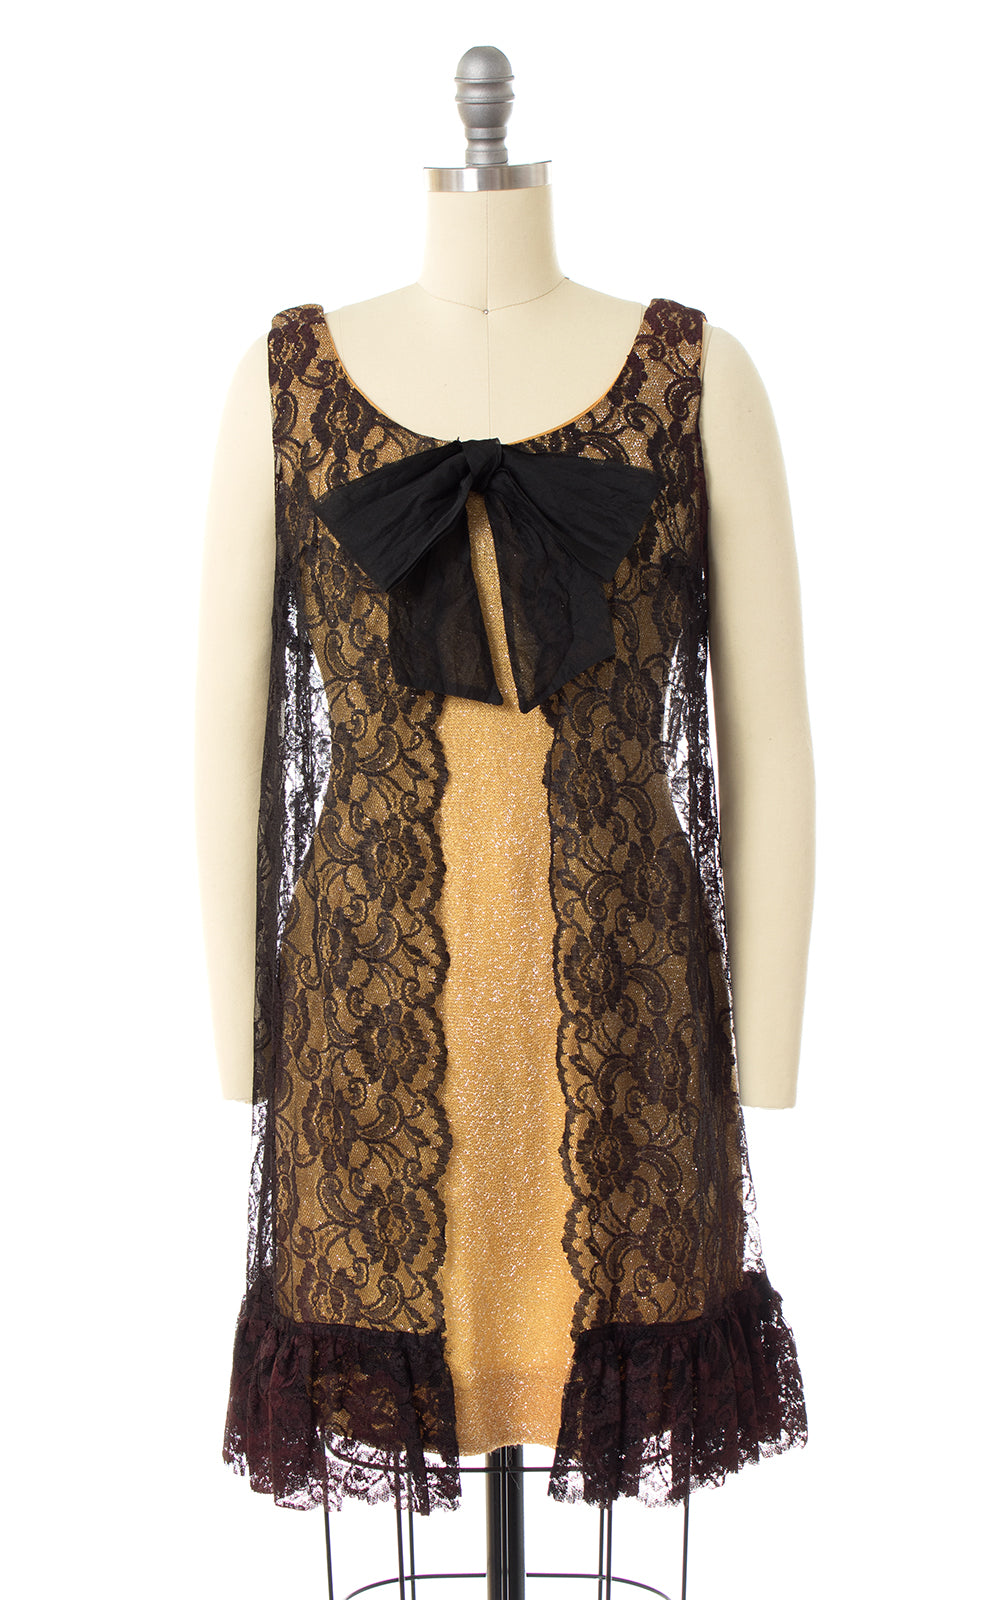 1960s Metallic Gold & Lace Party Dress